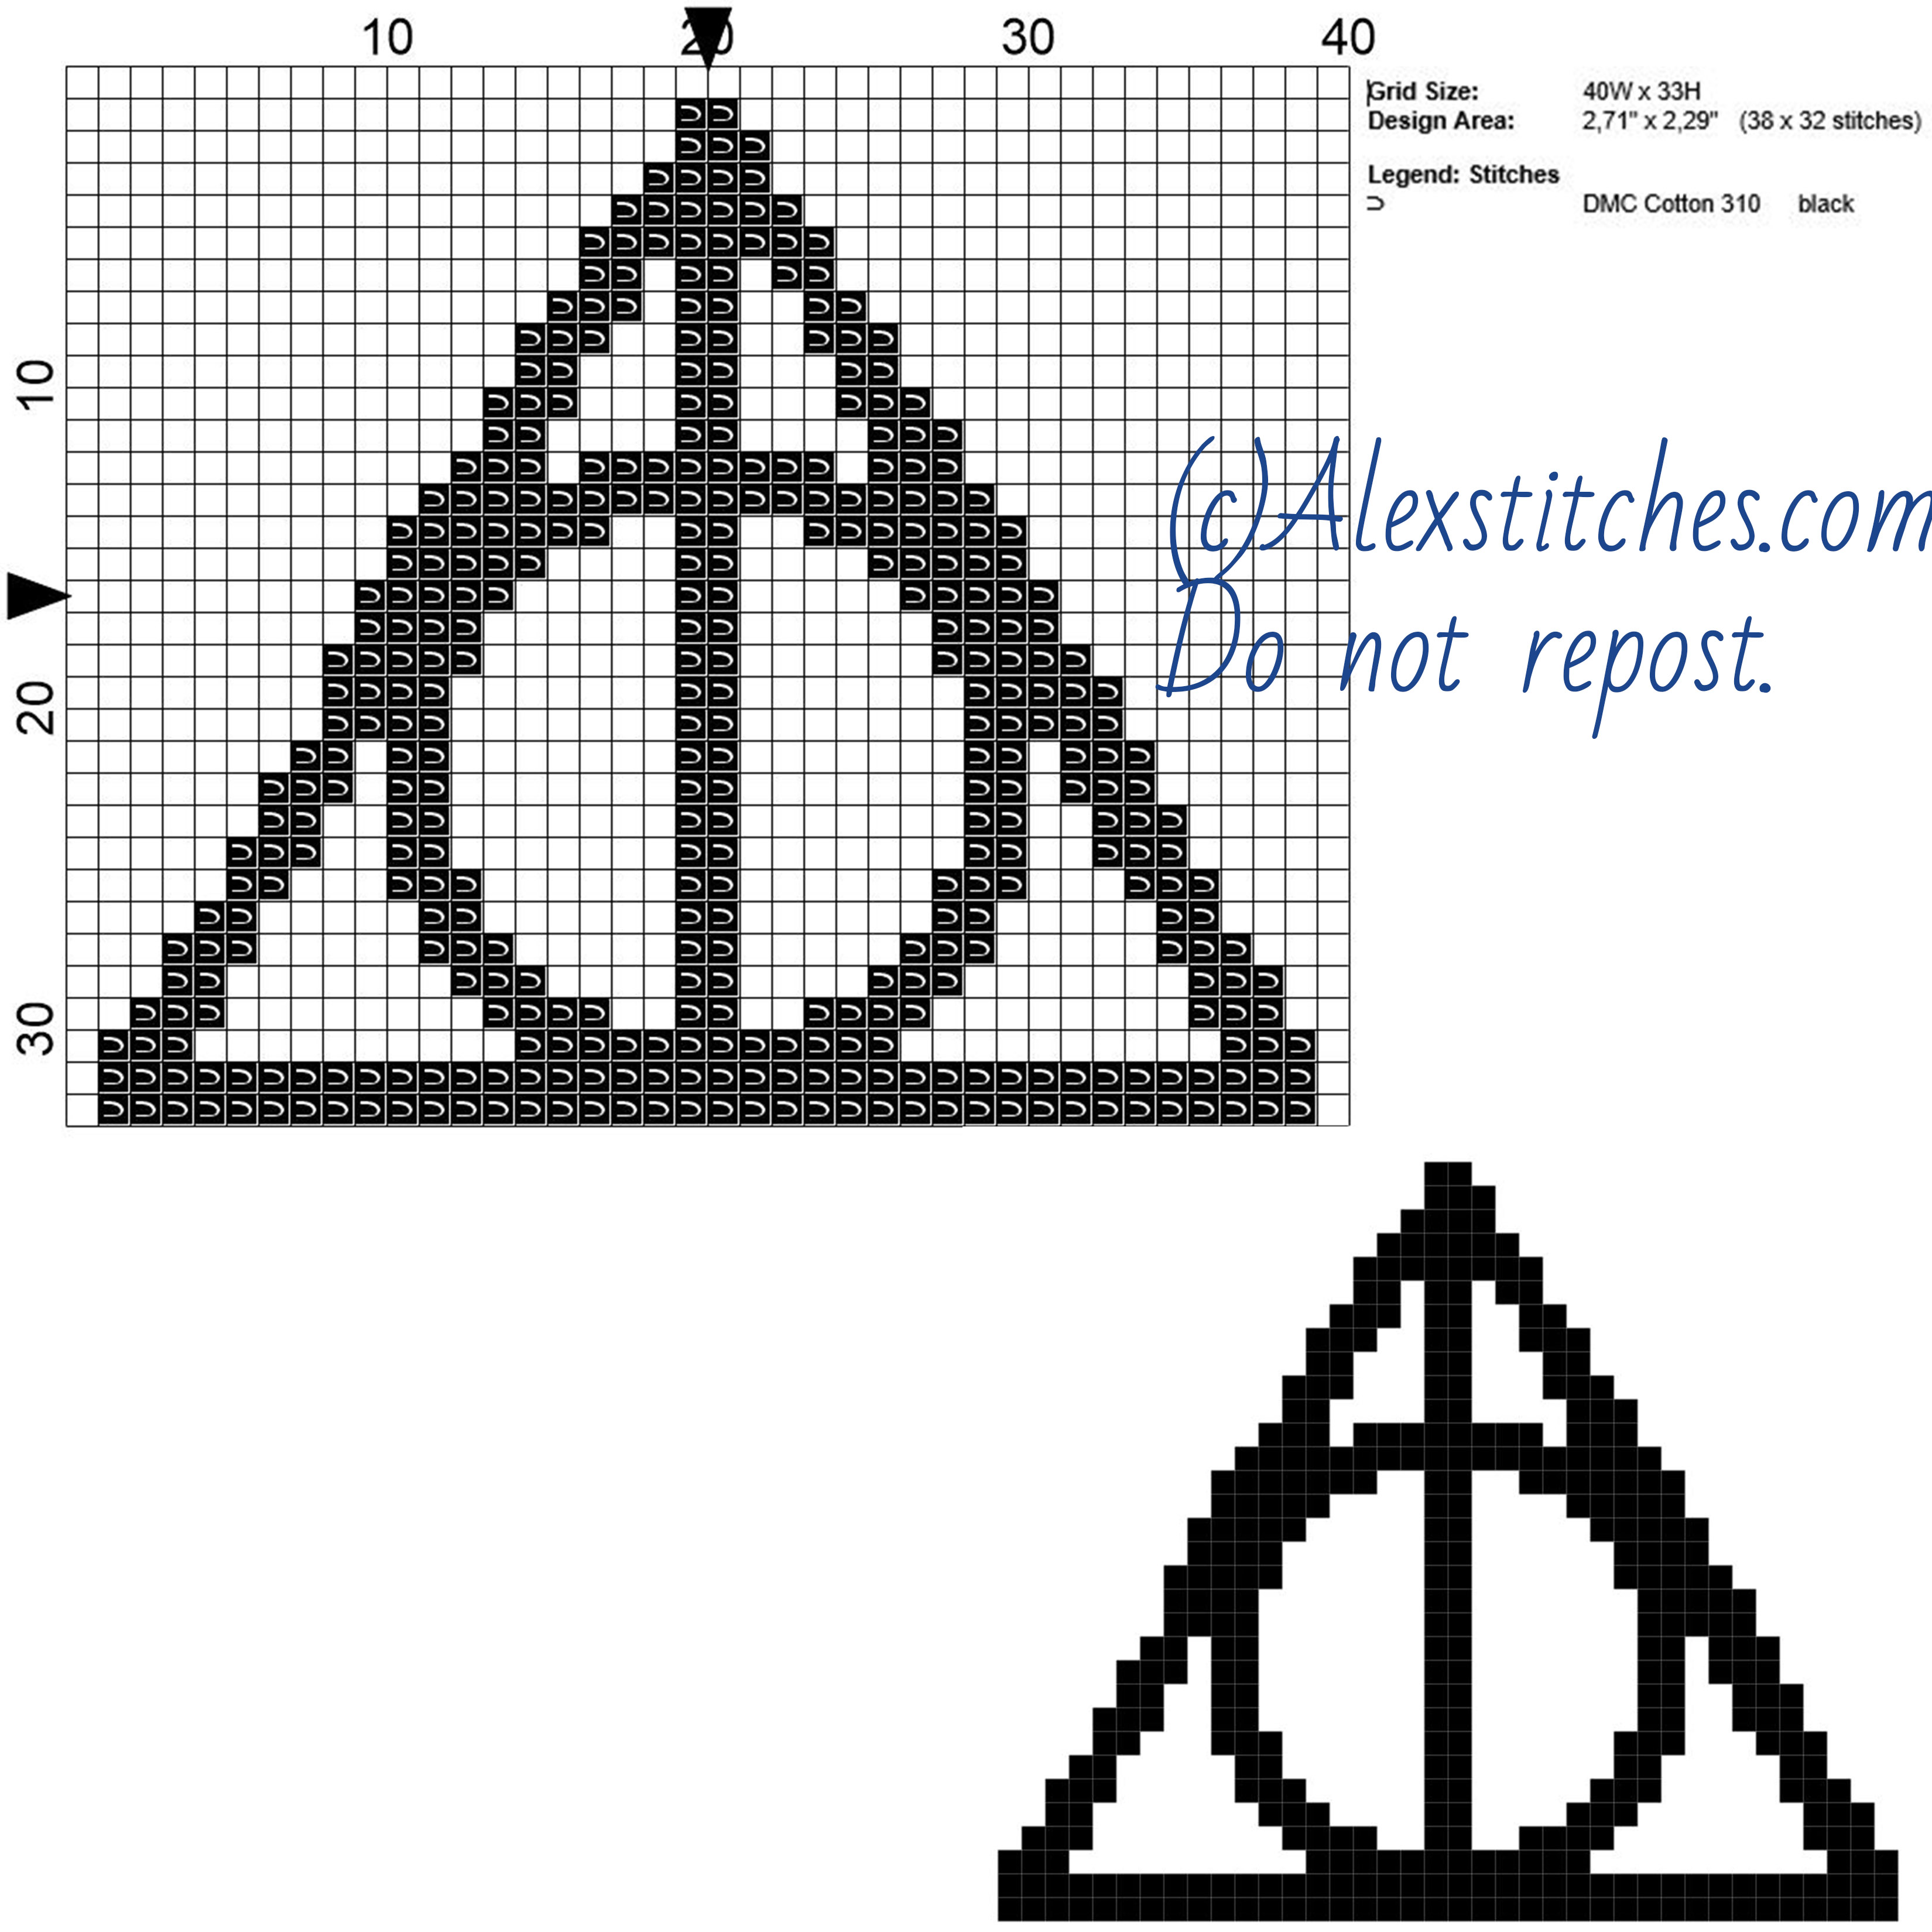 Harry Potter deathly hallows symbol free cross stitch pattern 40x33 1 color  - free cross stitch patterns by Alex